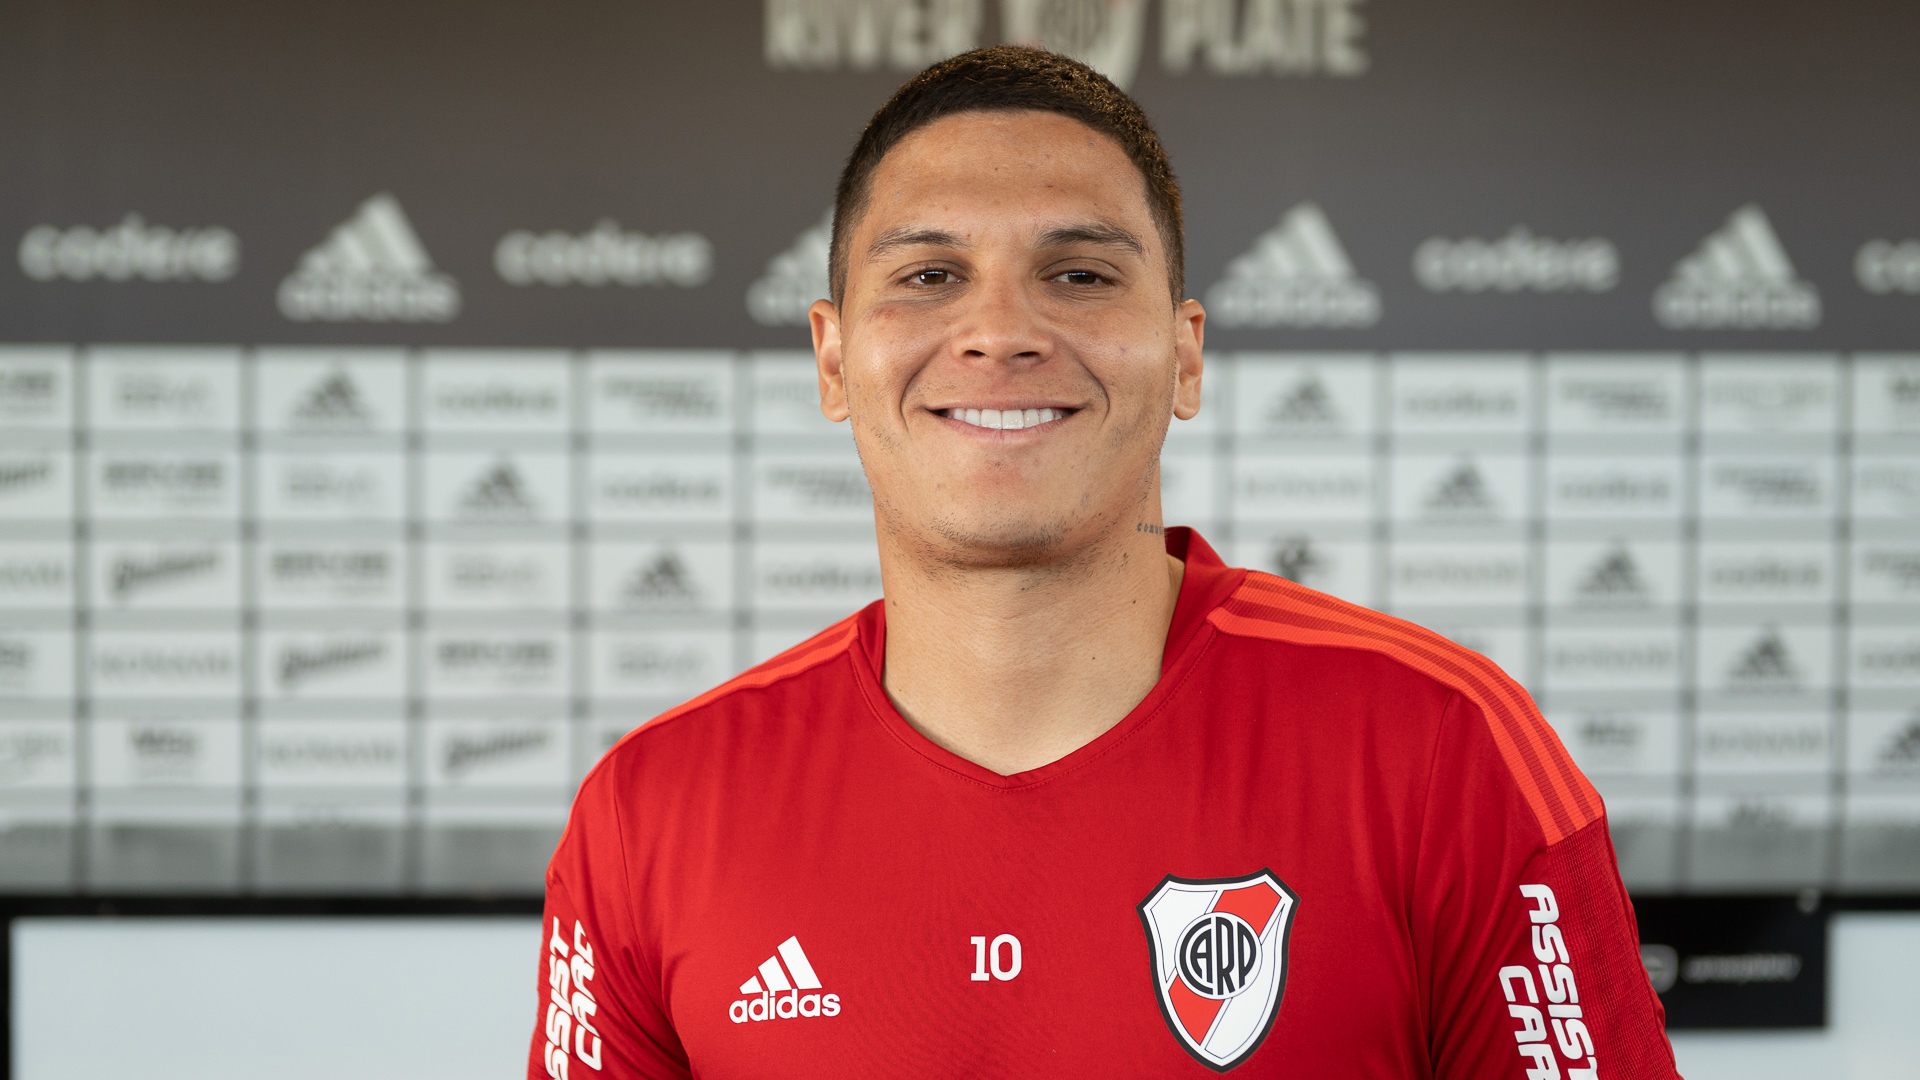 Juan Fernando Quintero could continue his career in Brazil, the United States or Mexico